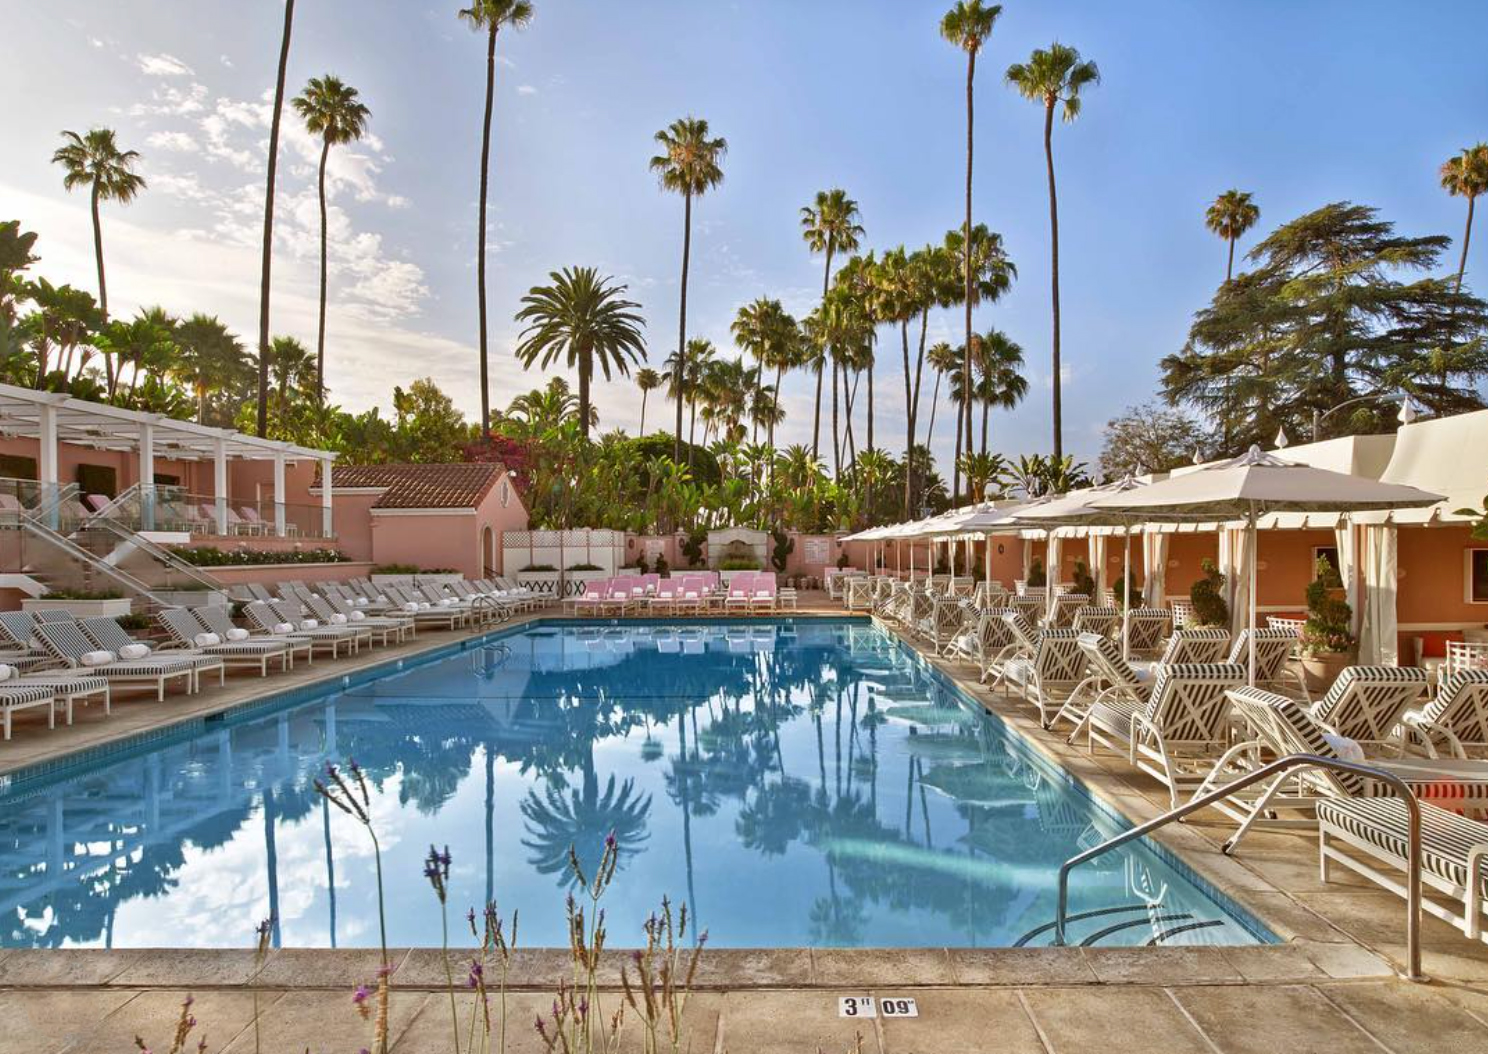 Image of BH Hotel poolside